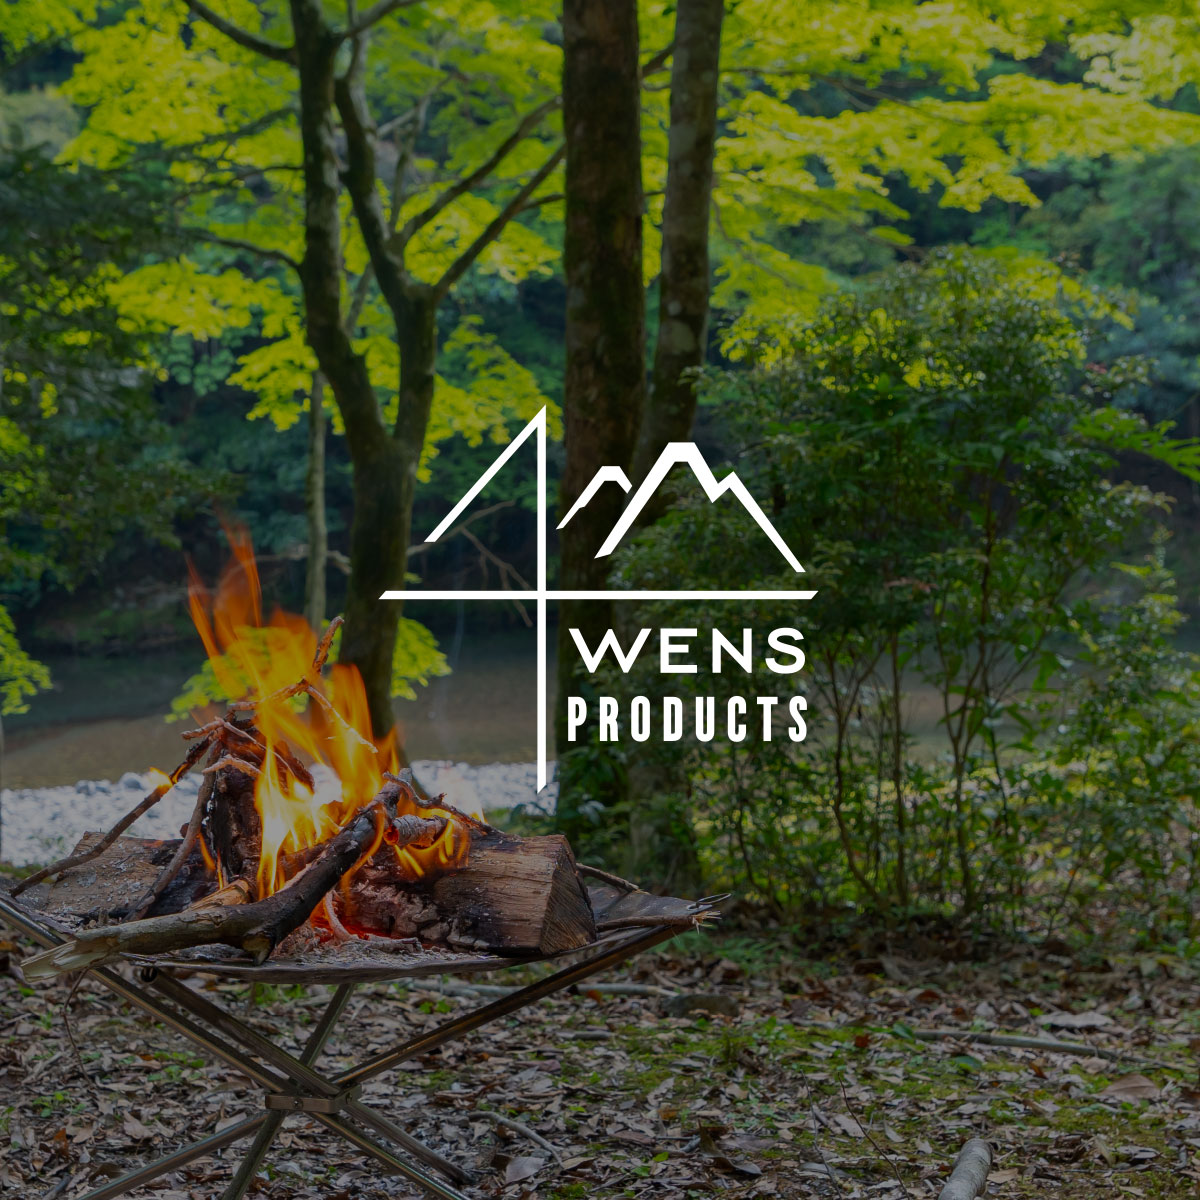 WENS PRODUCTS